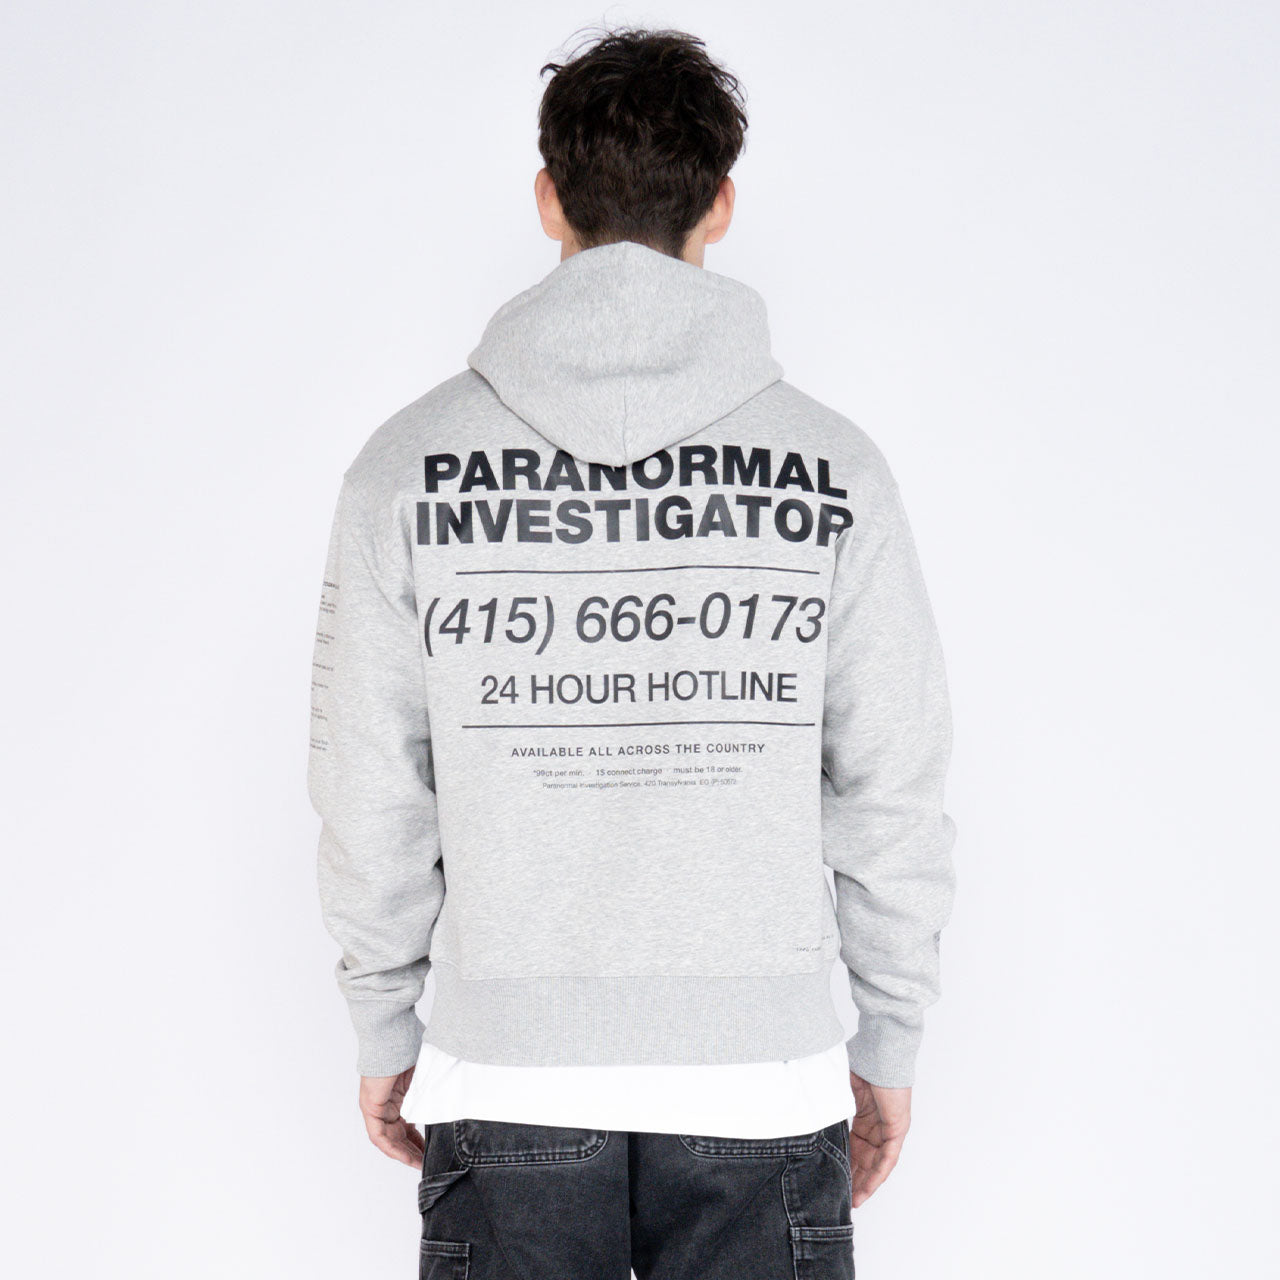 Snash - Paranormal Investigator "Patched" Hoodie